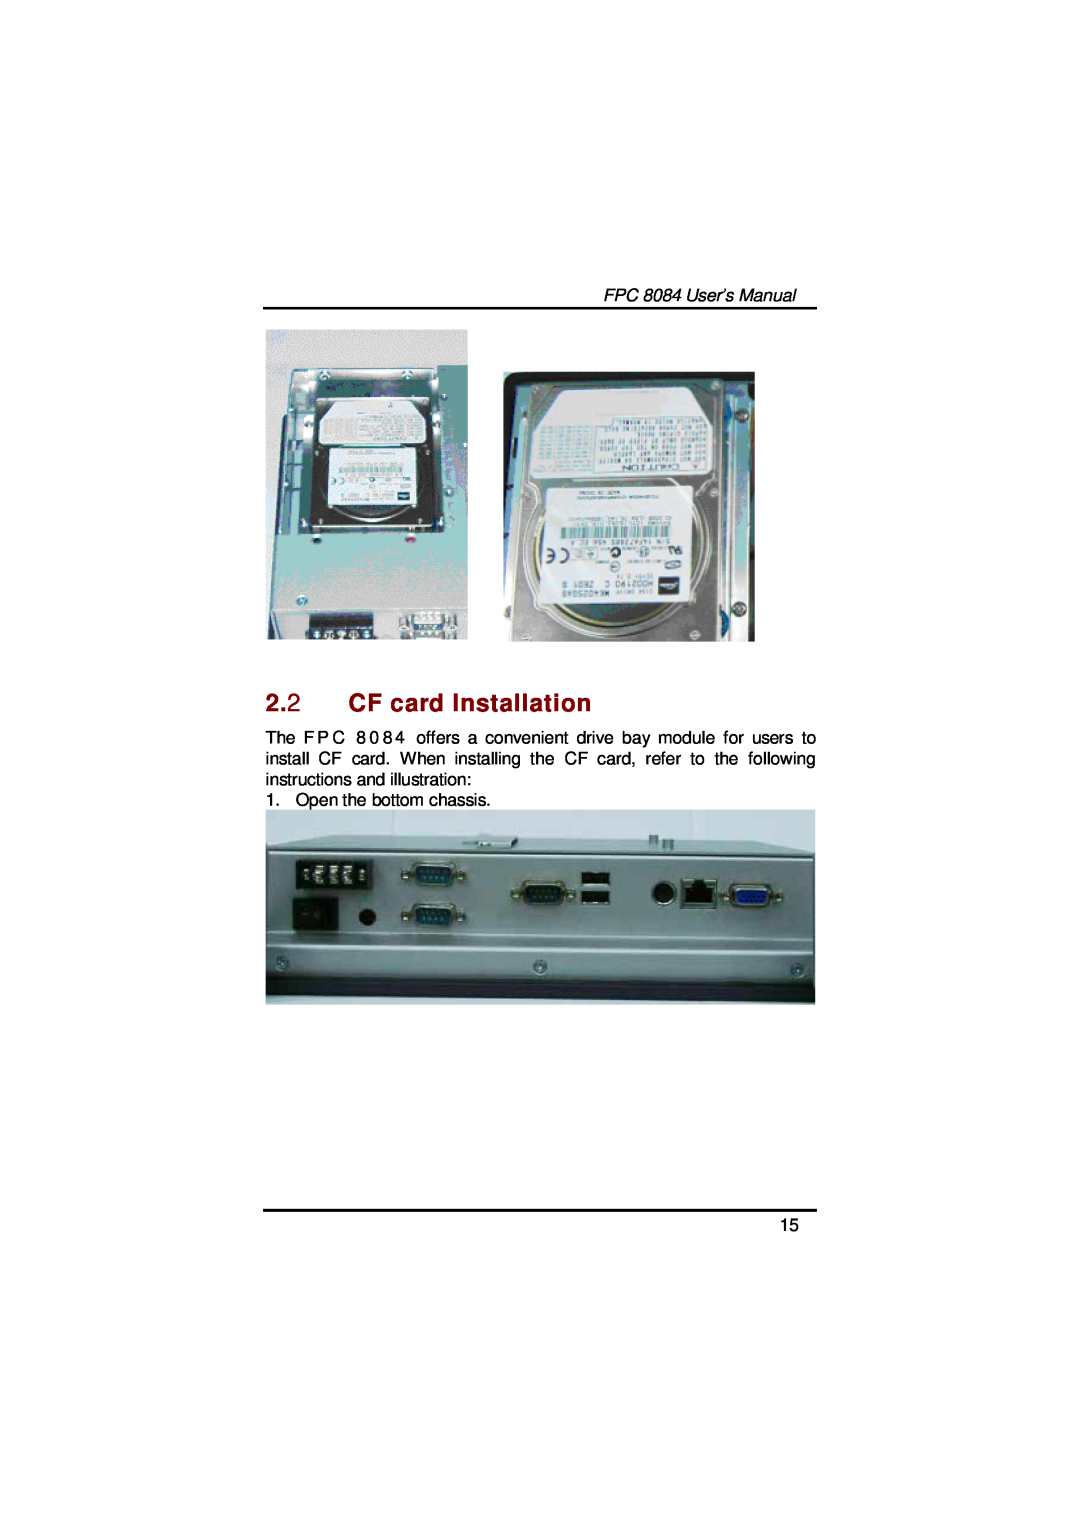 Acnodes user manual CF card Installation, Open the bottom chassis, FPC 8084 User’s Manual 